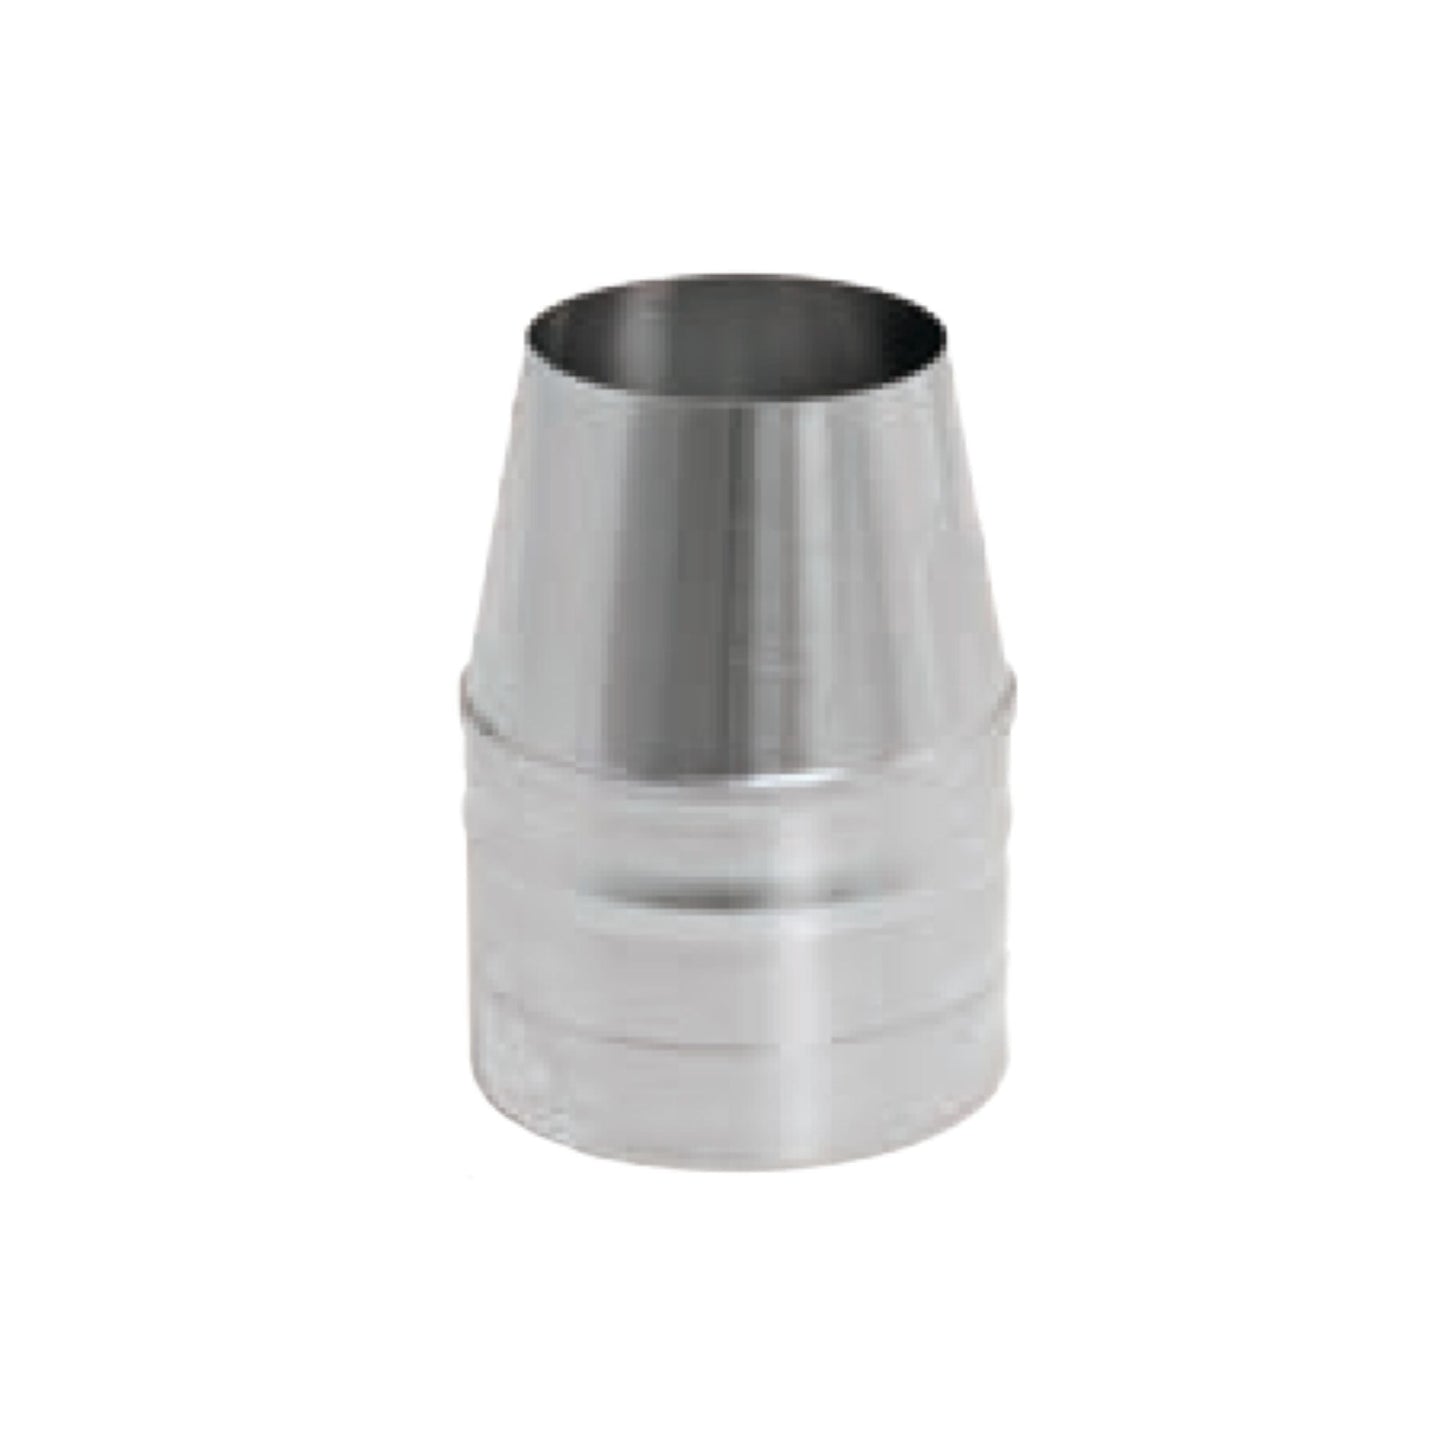 DuraVent FasNSeal 12" x 5" 29-4C Stainless Steel Termination Cone